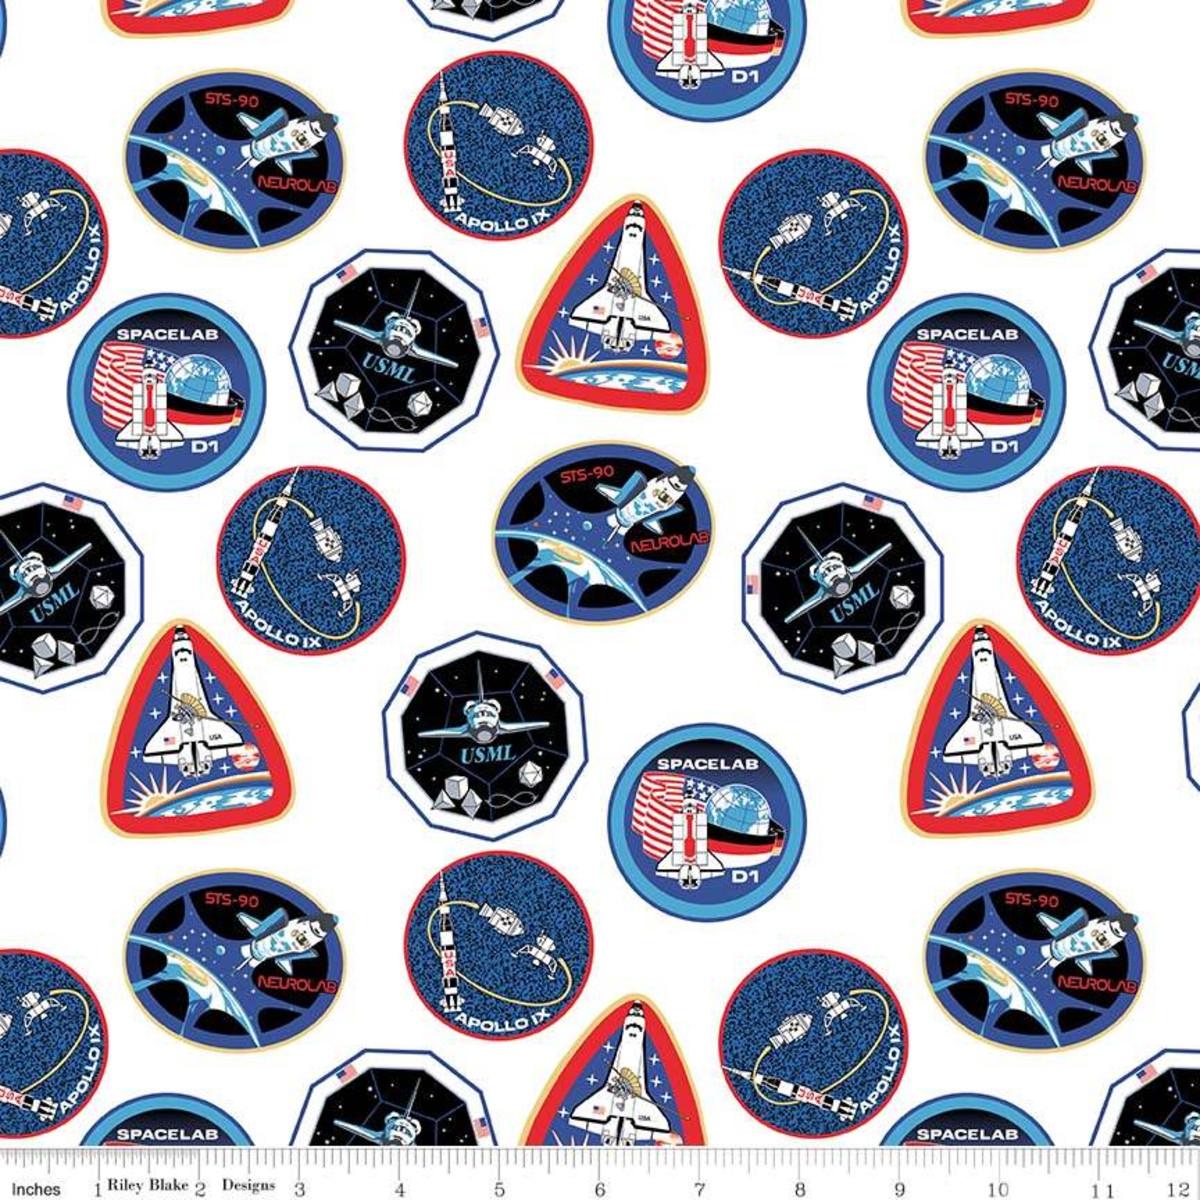 NASA Out of the World Patches